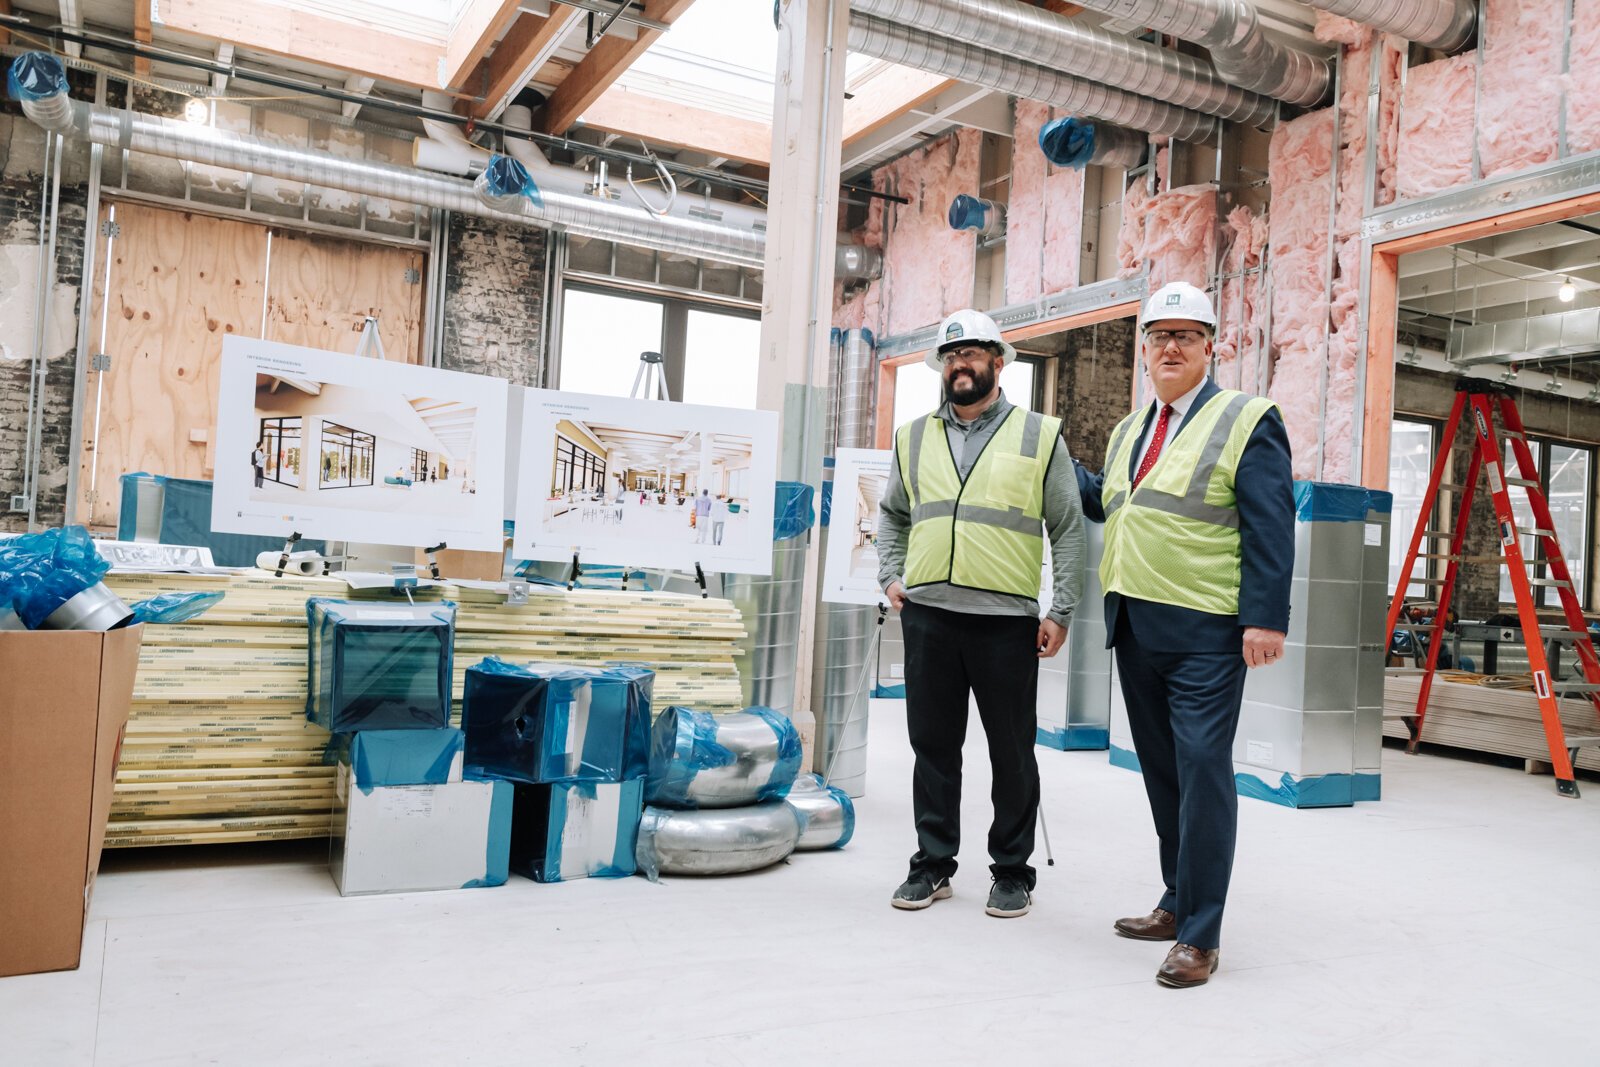 Riley Johnson, left, Director of the Amp Lab at Fort Wayne Community Schools, speaks with members of the media inside the Amp Lab's future space in Building 31 of Electric Works. (December 2021) 